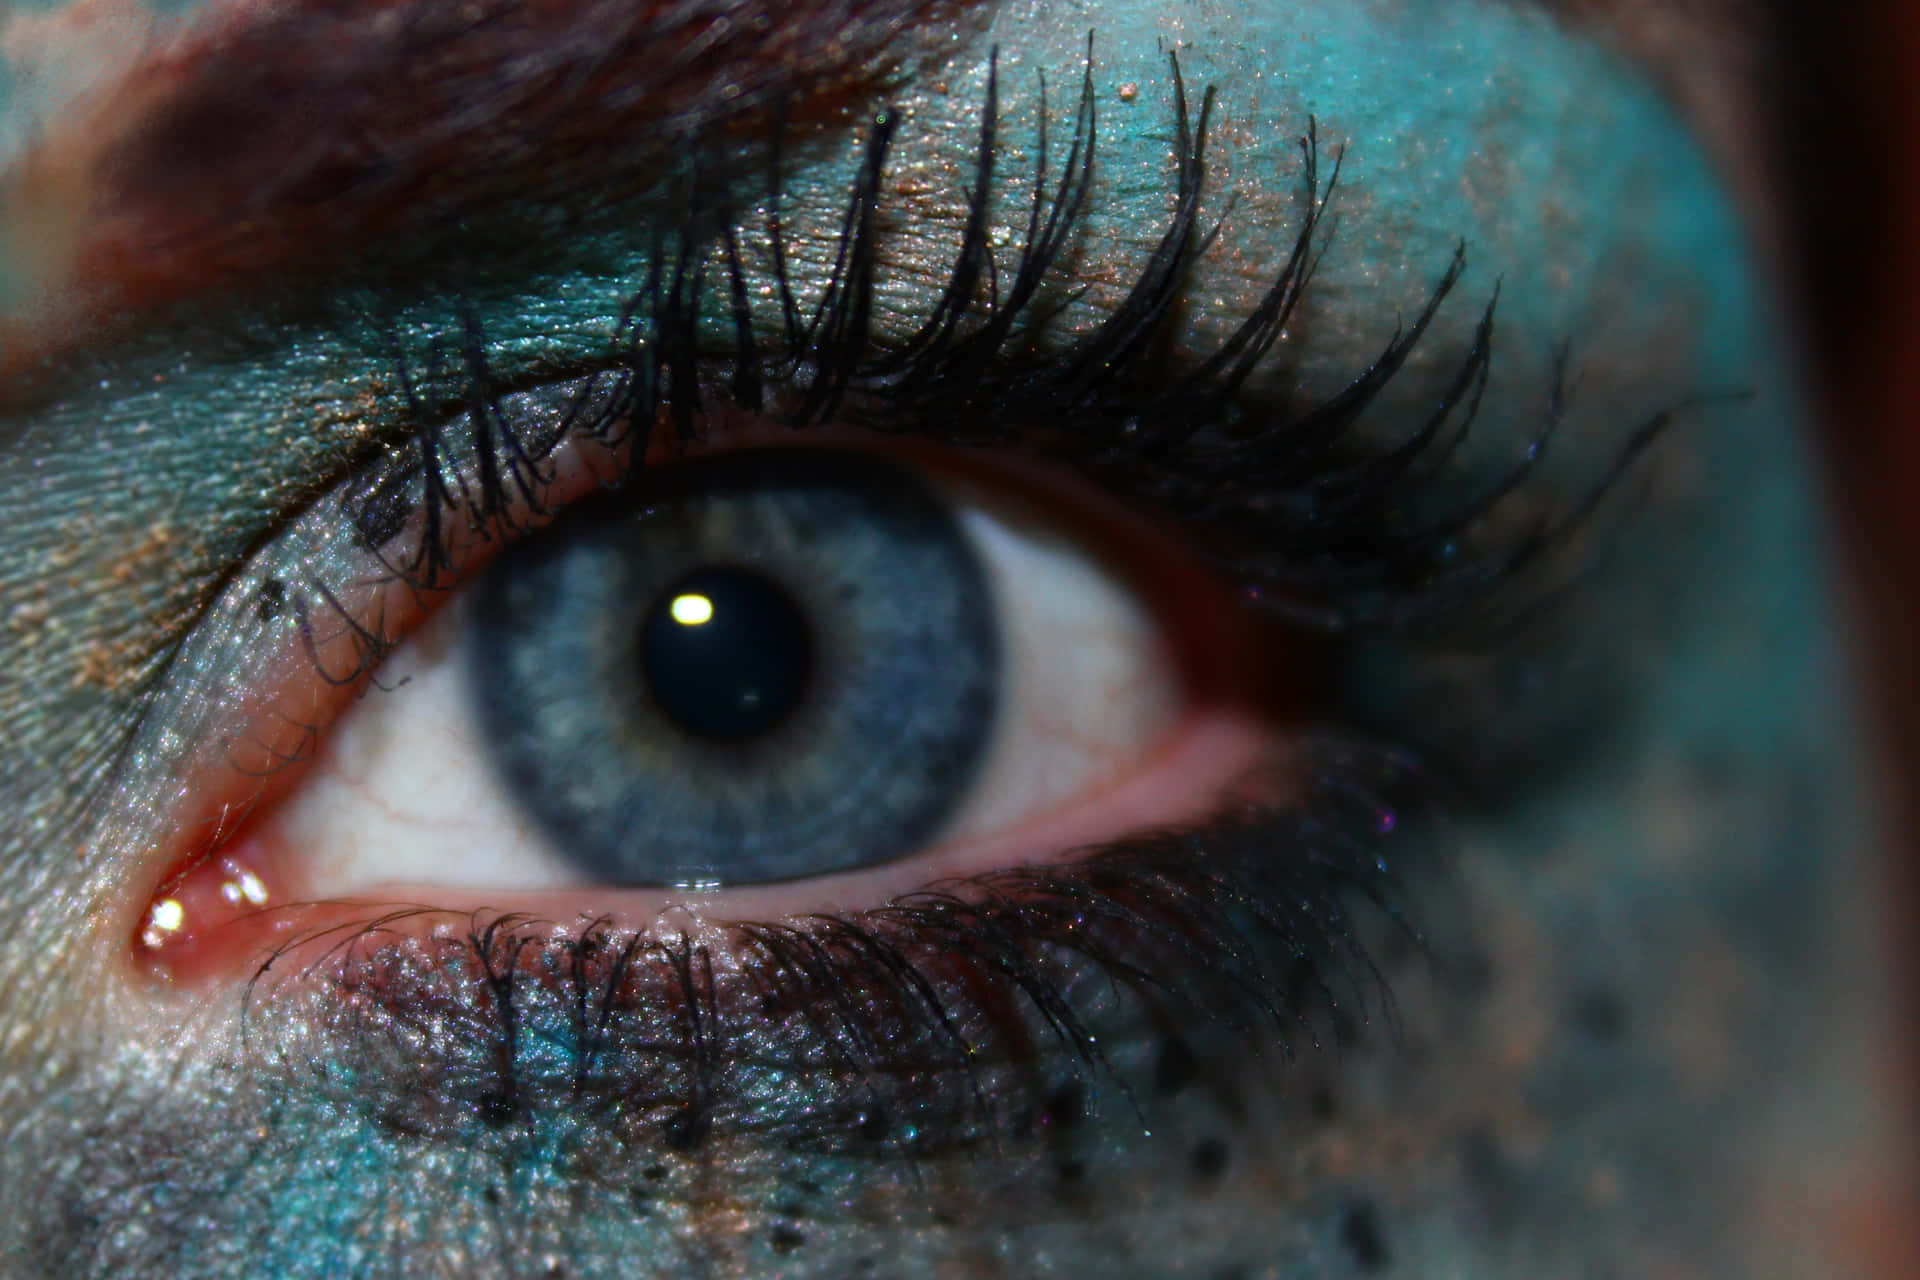 A Close Up Of A Woman's Eye With Blue Makeup Wallpaper